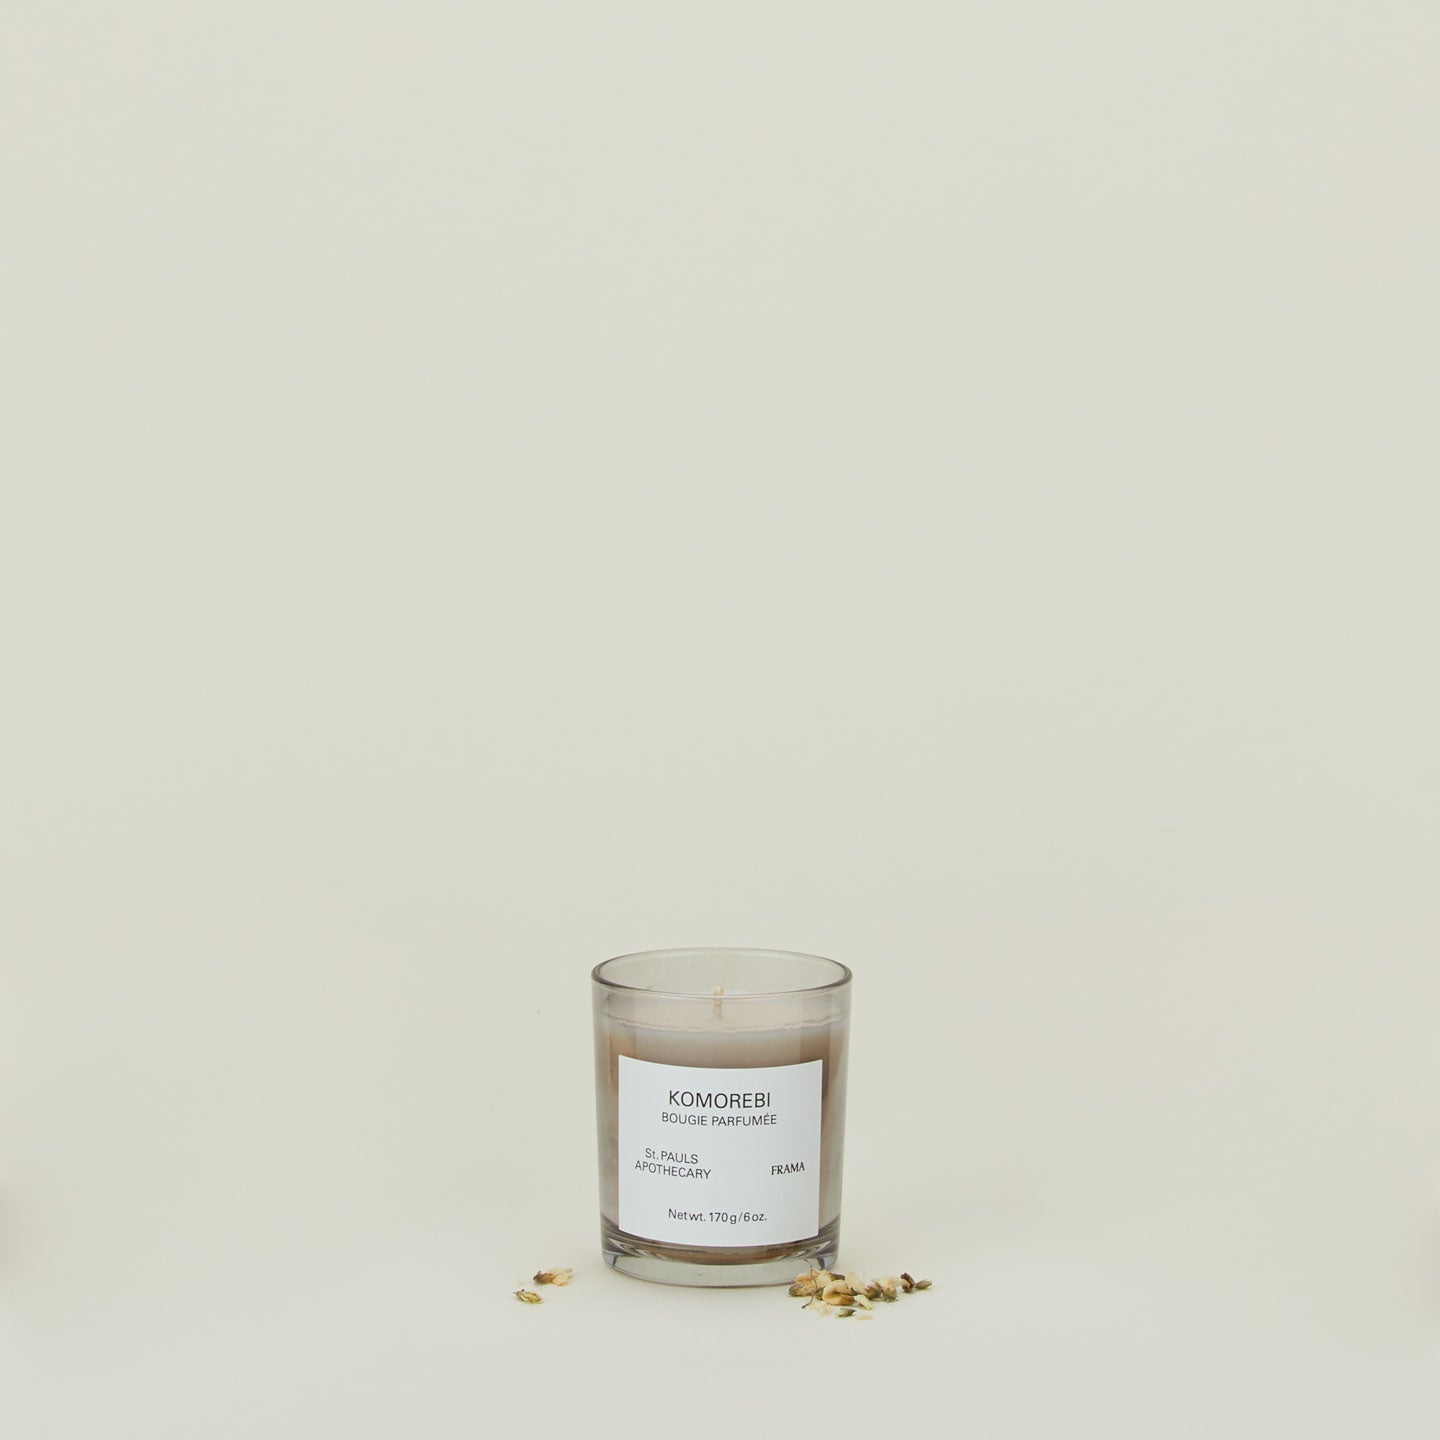 A wax candle with the scent Komorebi, with dried florals.